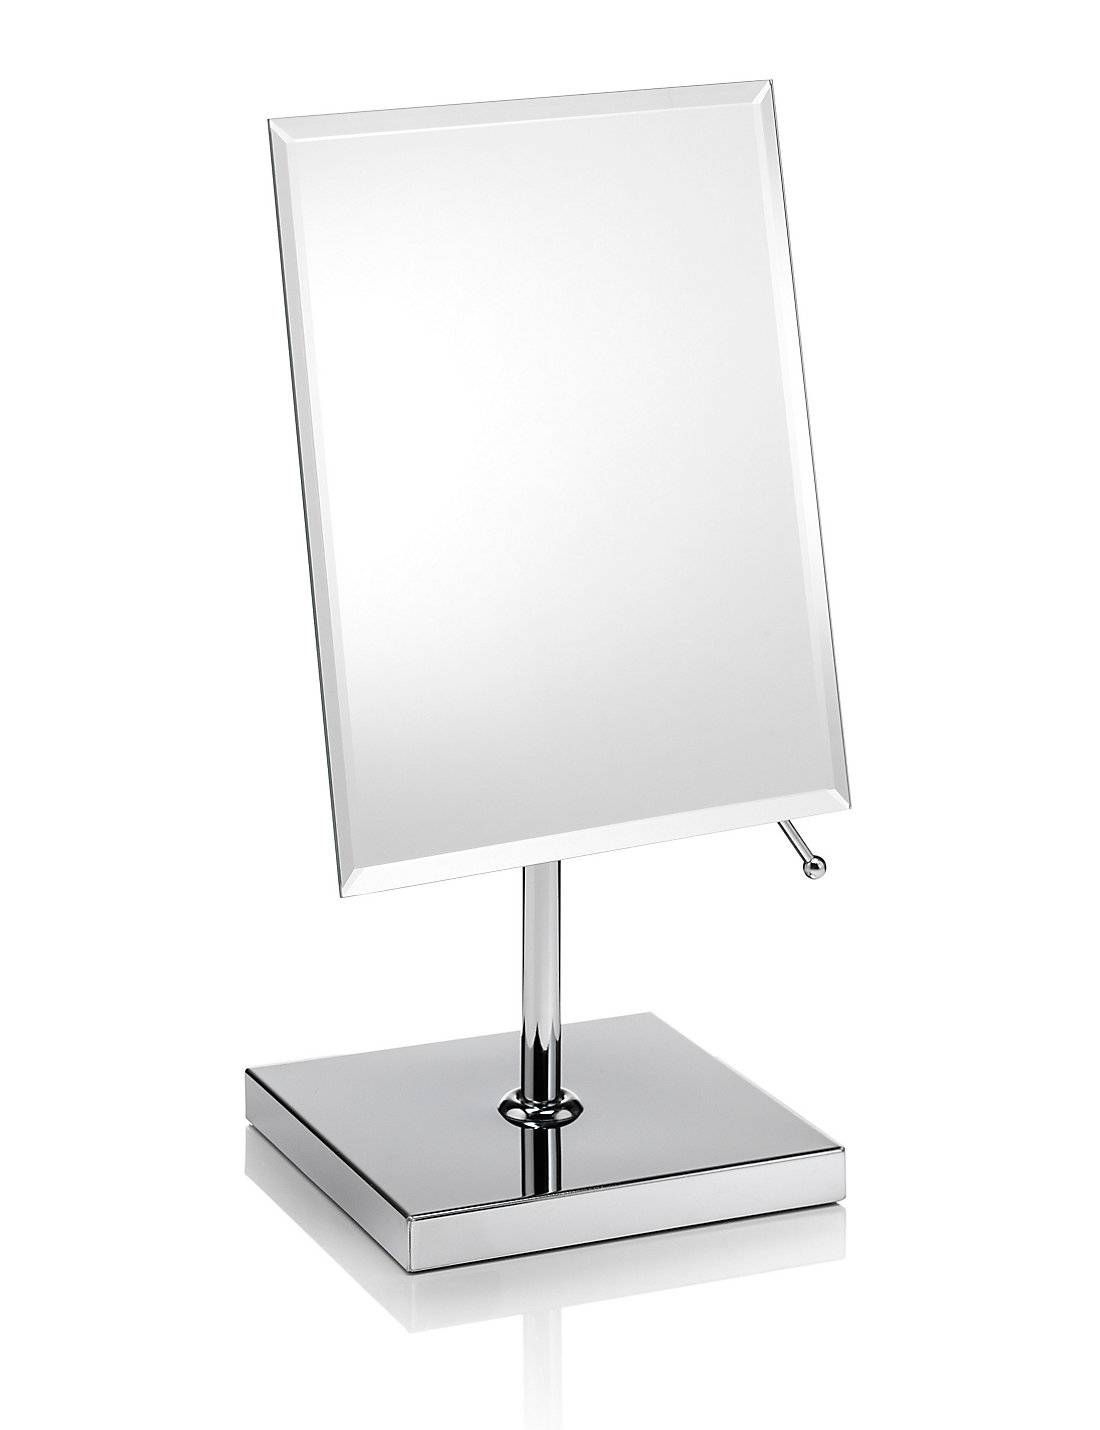 Awesome Free Standing Small Bathroom Mirrors 81 With Free Standing Within Small Free Standing Mirrors (View 3 of 25)